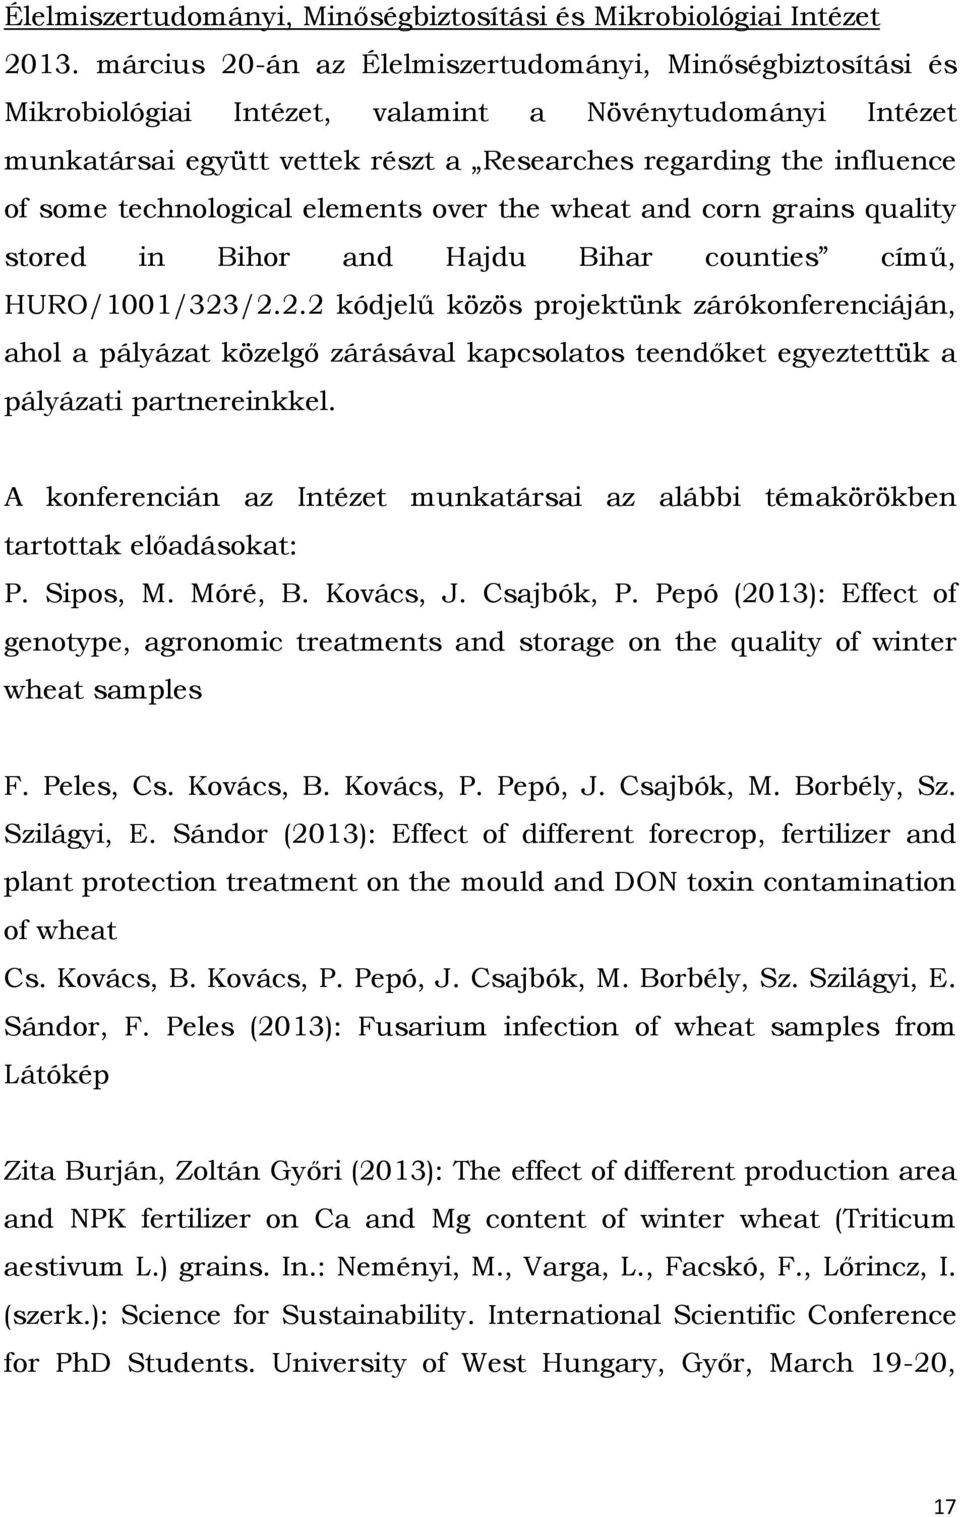 technological elements over the wheat and corn grains quality stored in Bihor and Hajdu Bihar counties című, HURO/1001/323